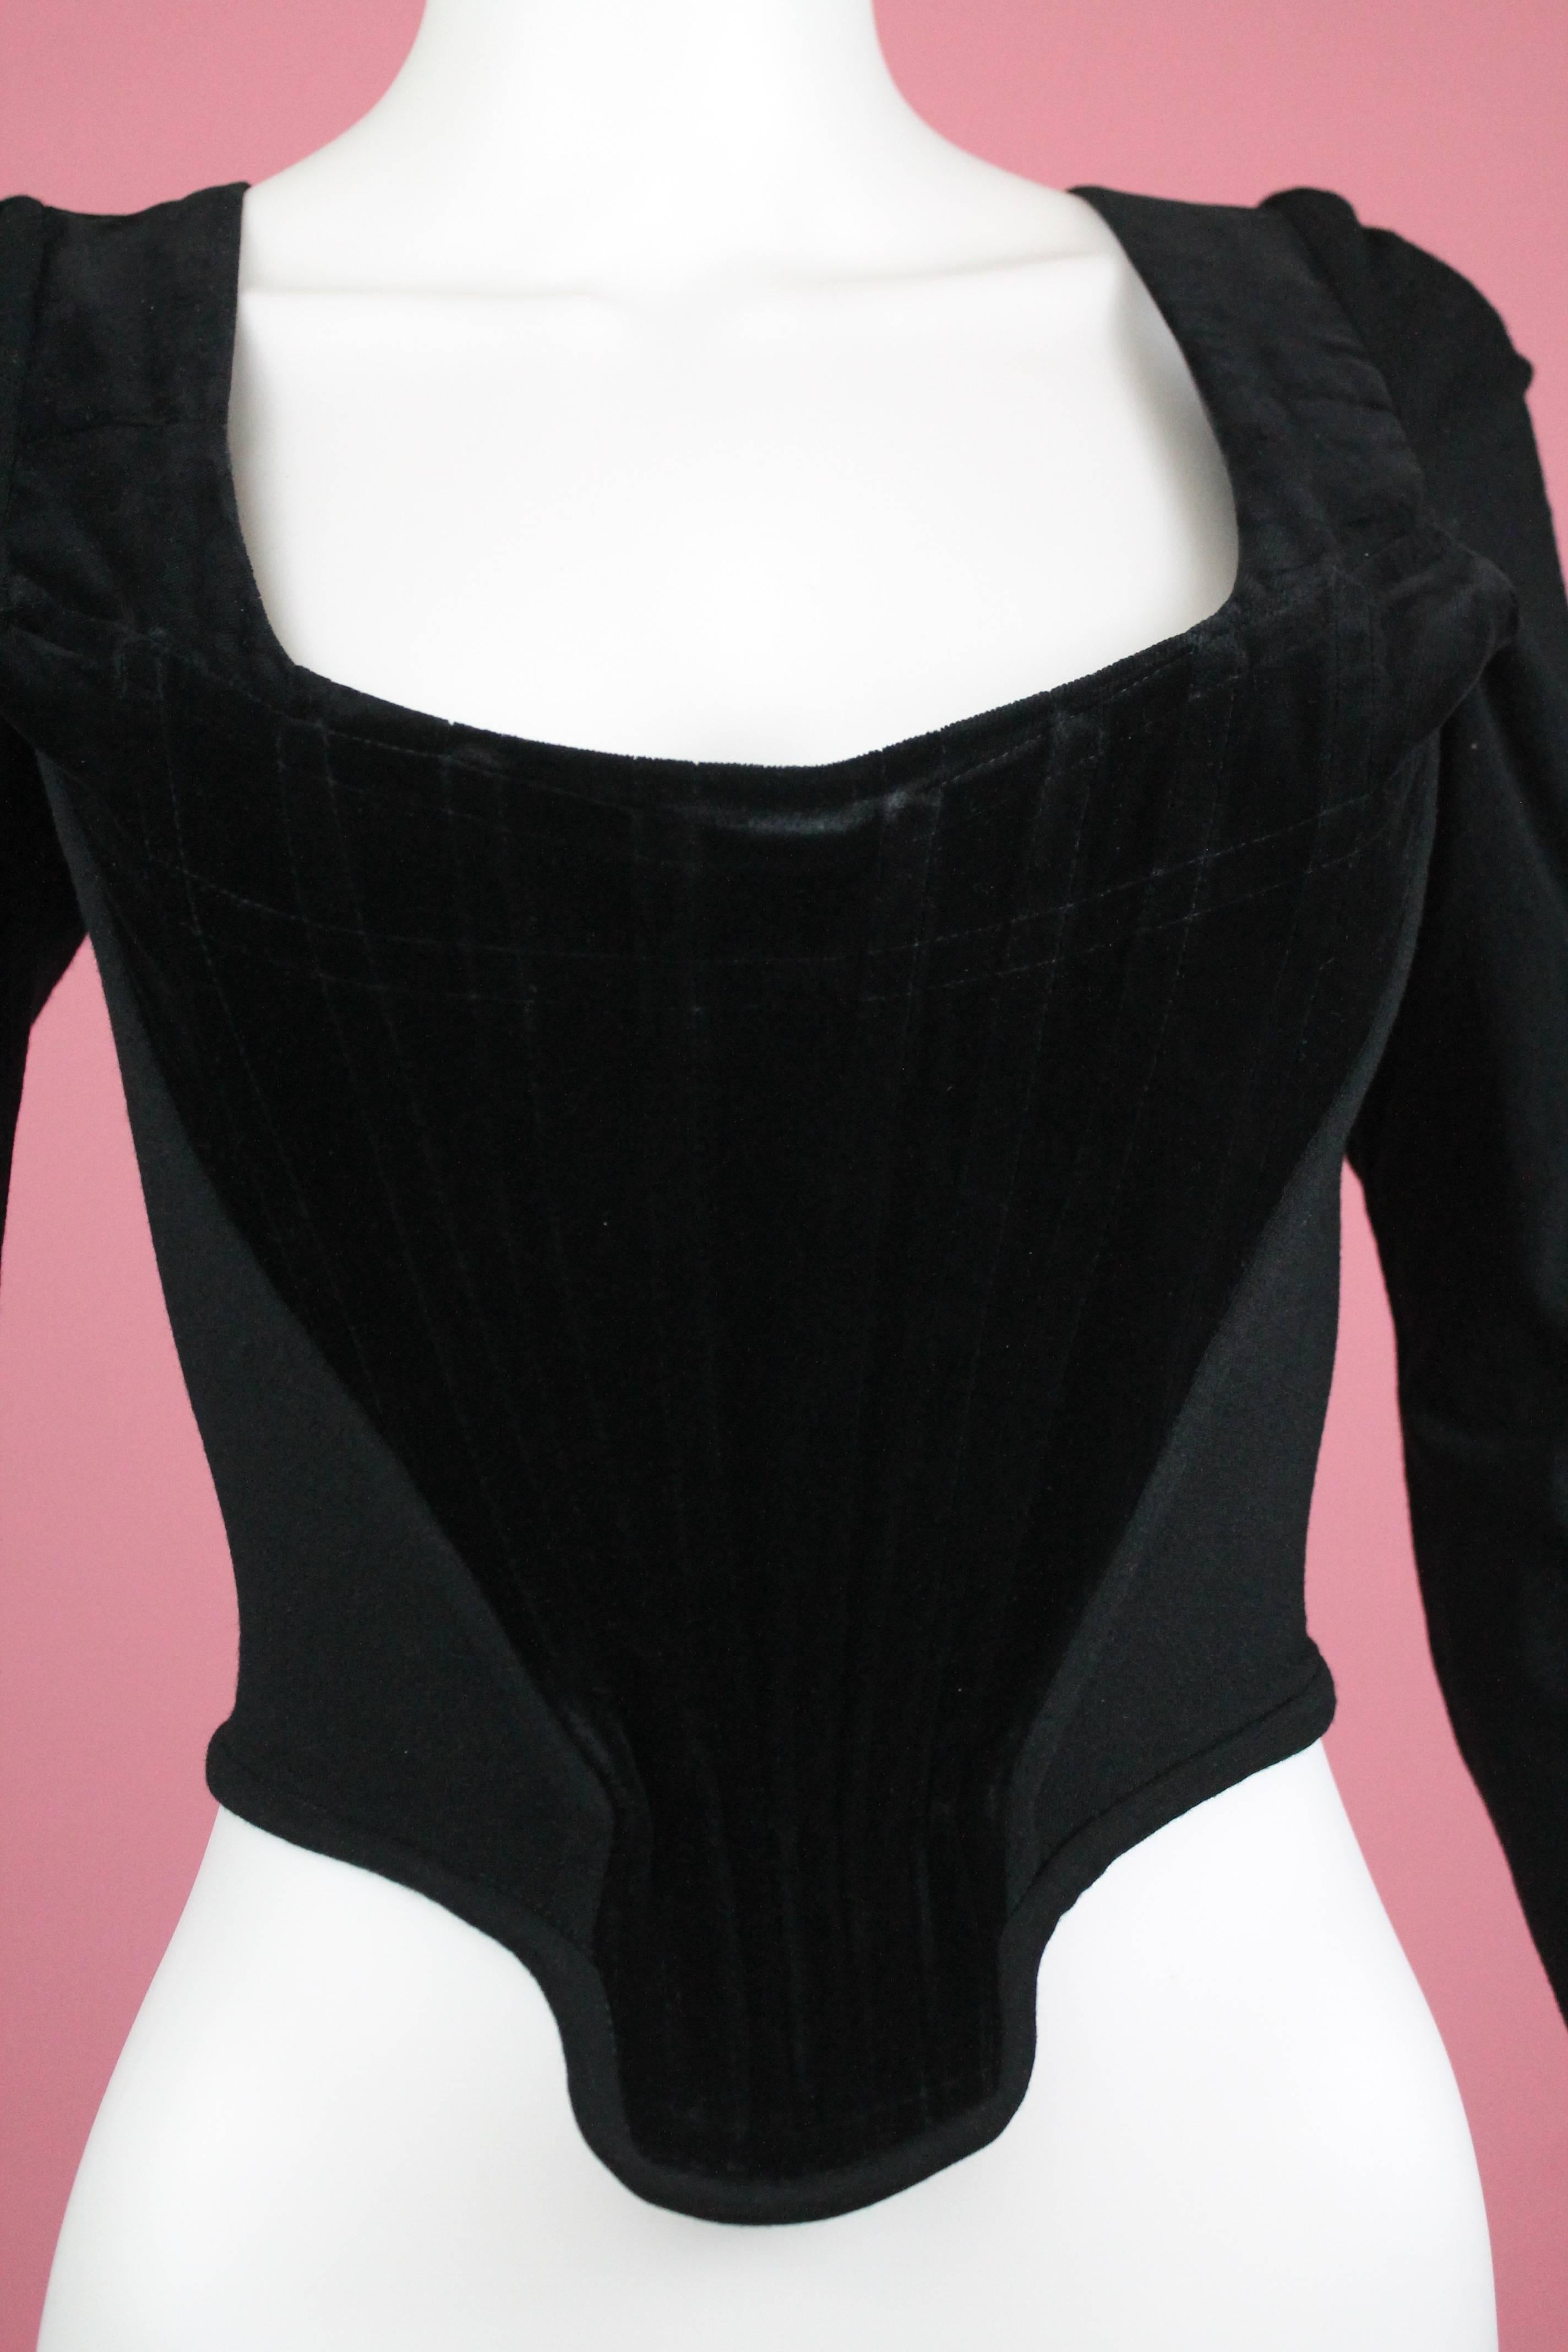 -Gorgeous corset from Vivienne Westwood, pre 